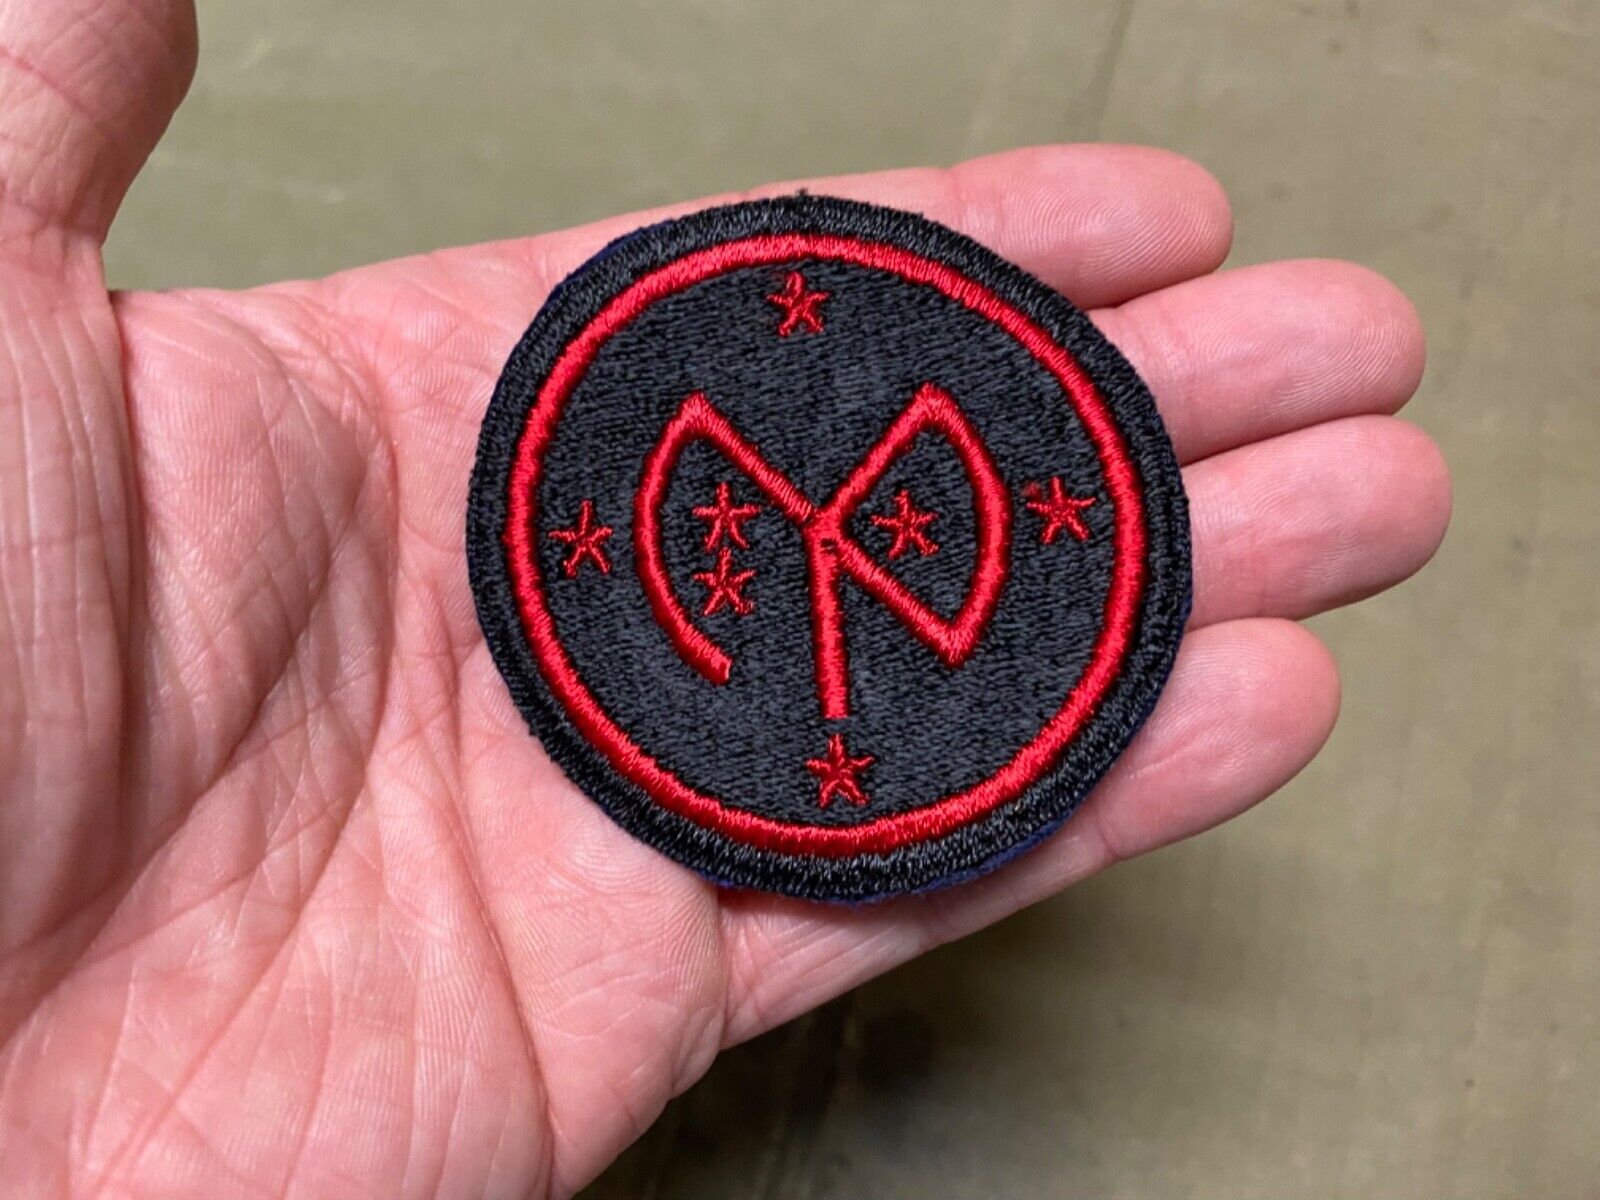 ORIGINAL WWII US 27TH INFANTRY DIVISION SLEEVE INSIGNIA PATCH-RARE BLACK BACK